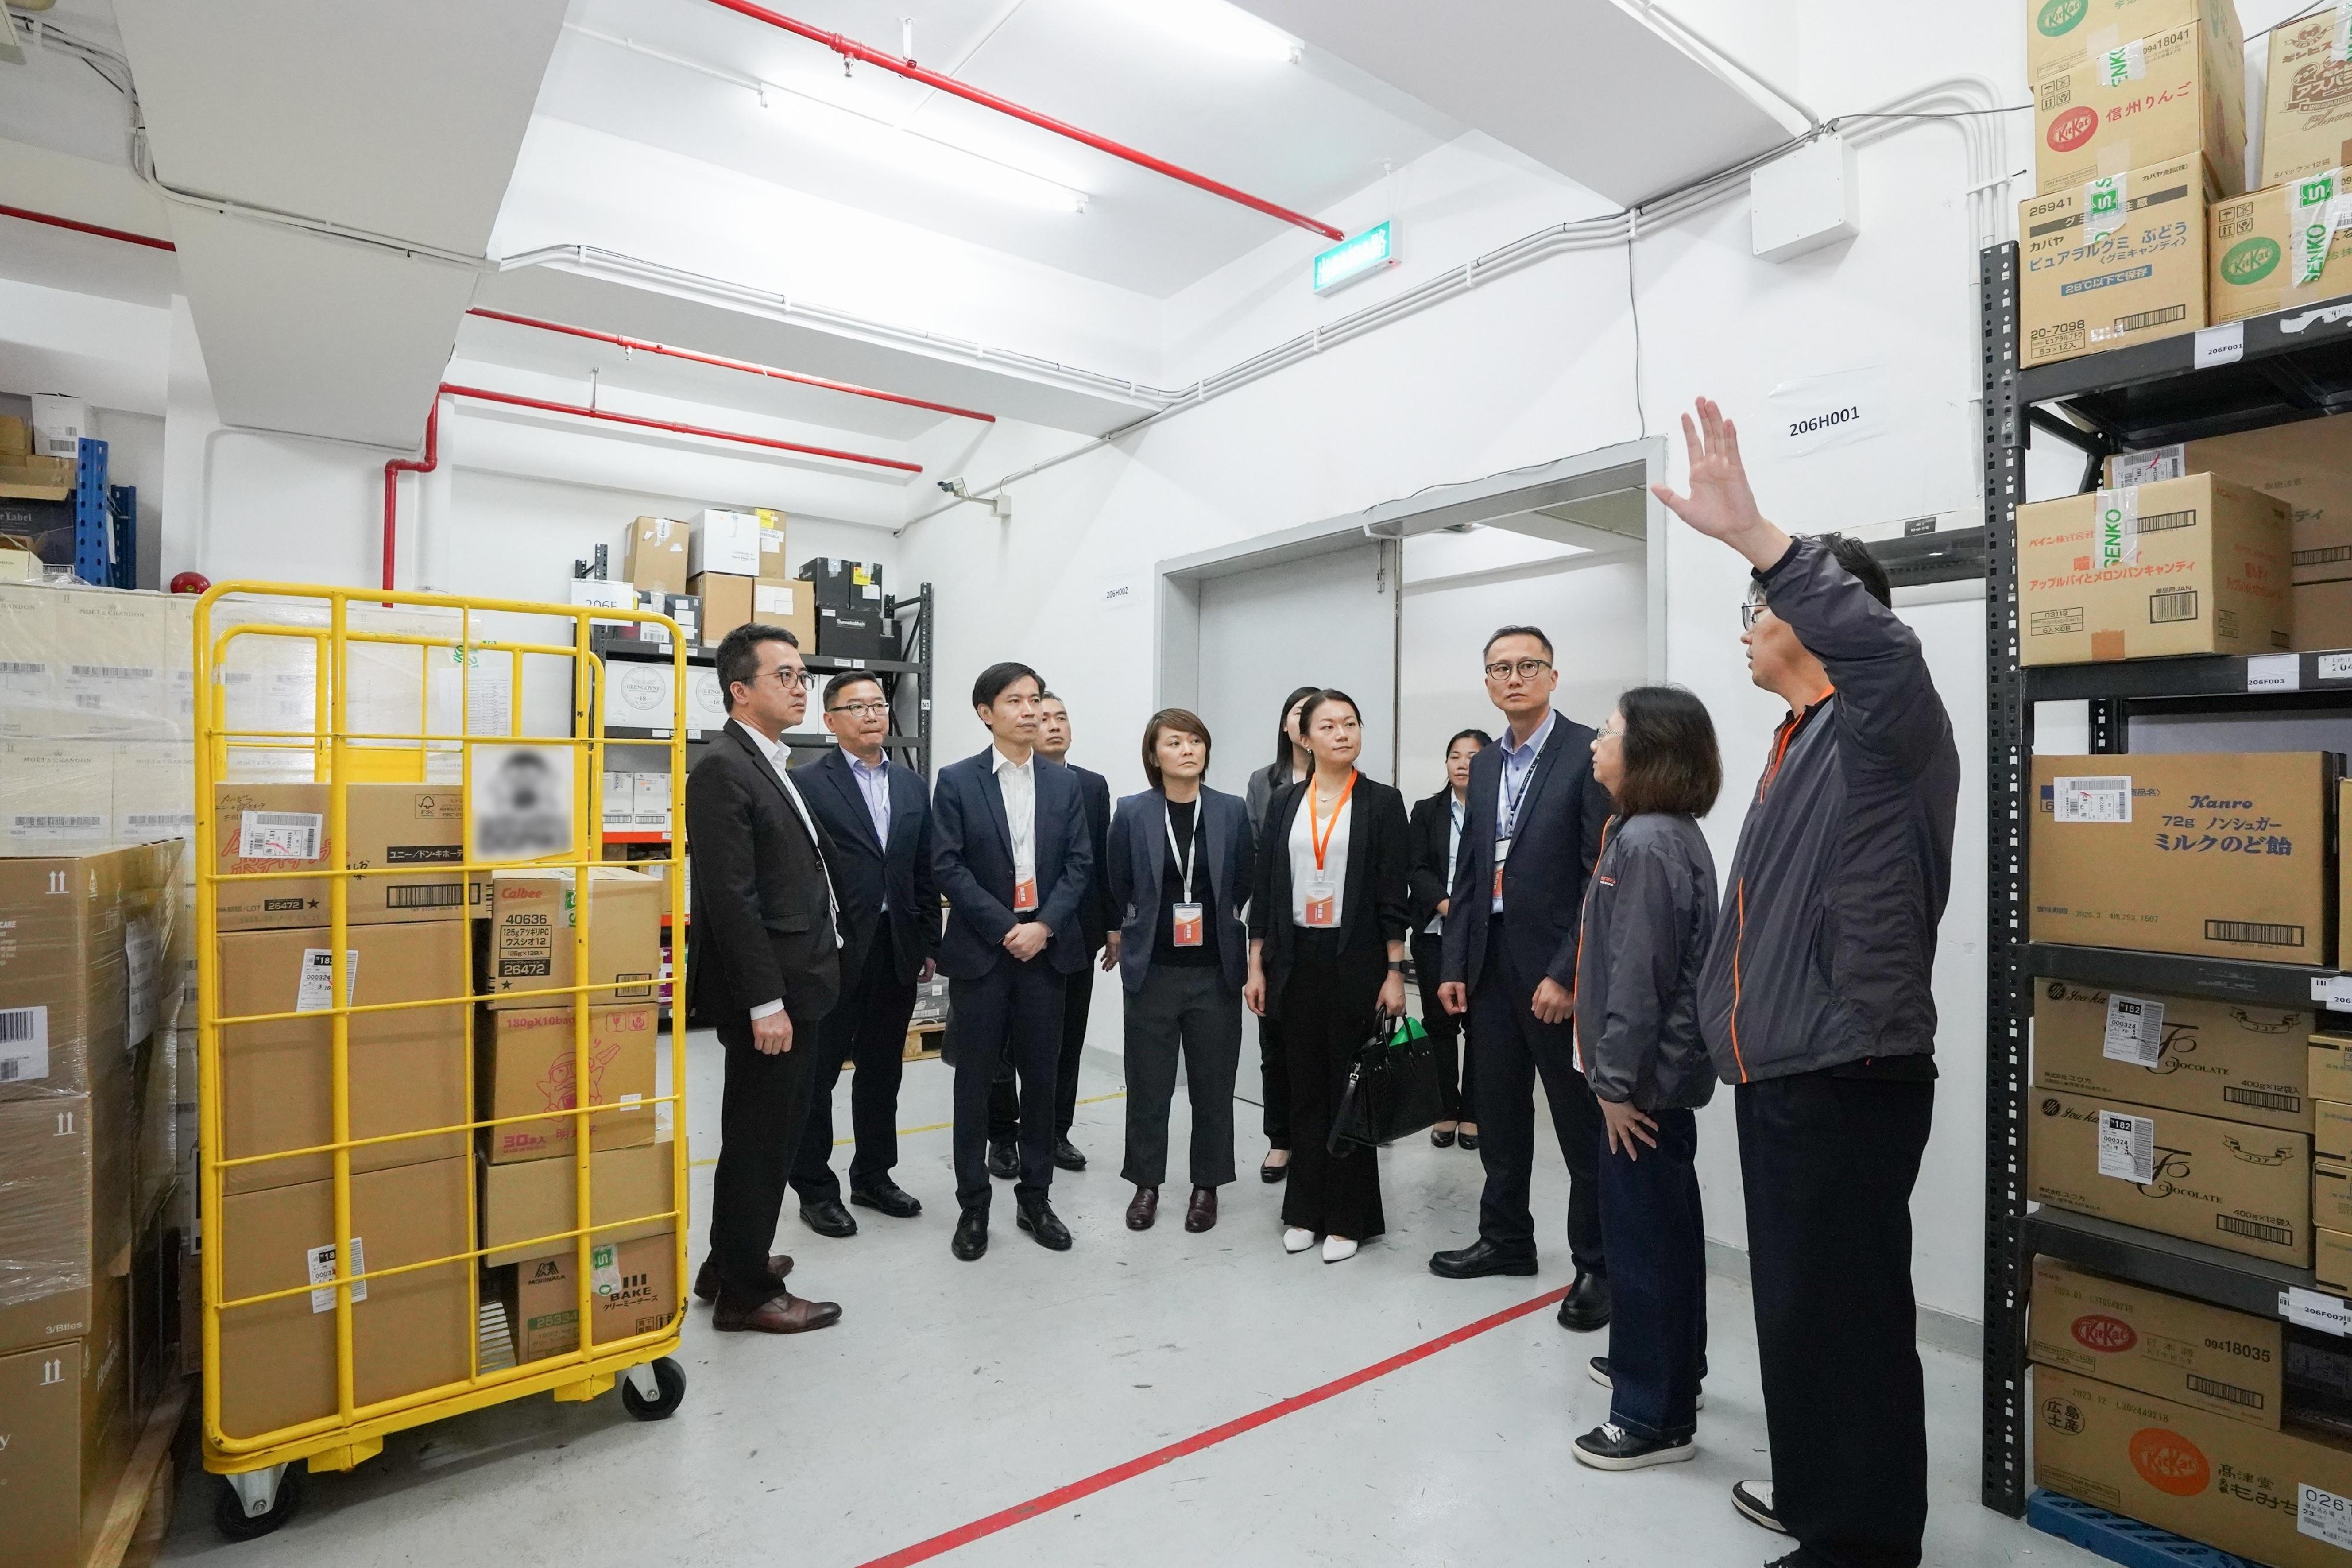 A Hong Kong Customs delegation visits a Macao Authorized Economic Operator (AEO) company to understand the standards of accreditation under the Macao AEO Programme.